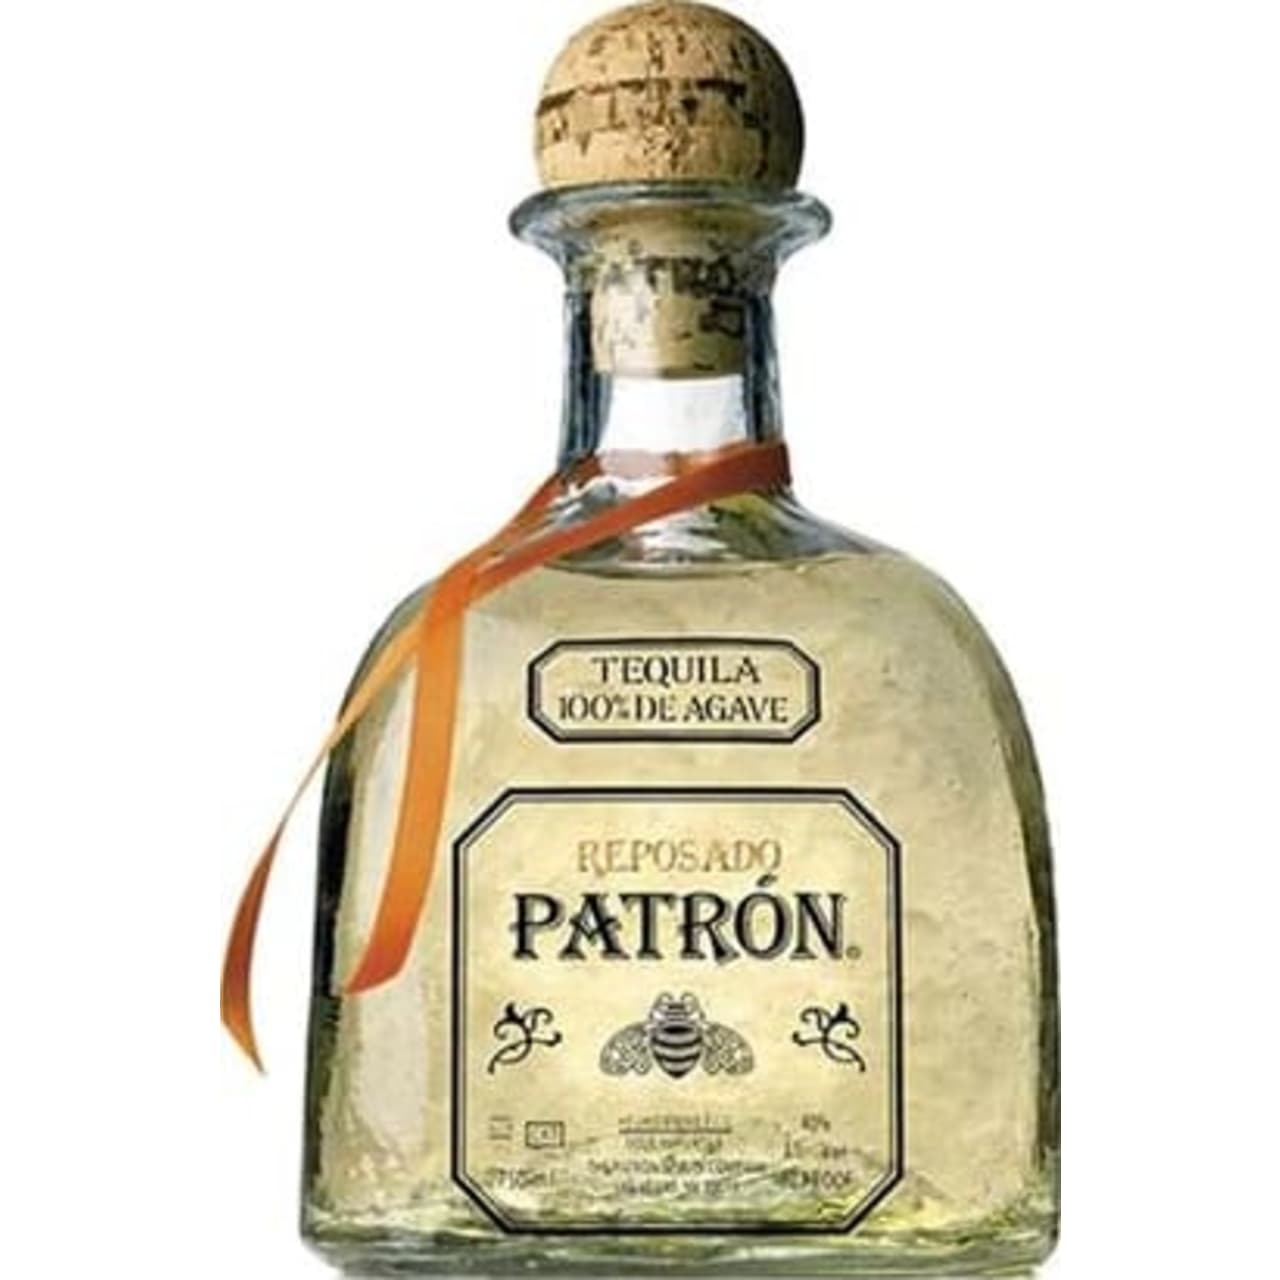 Patrón Reposado is aged for at least two months in a combination of new and used American, French and Hungarian oak barrels. This is done to maintain the fresh agave flavours unique to Patrón that mingle in perfect harmony with hints of light oak.